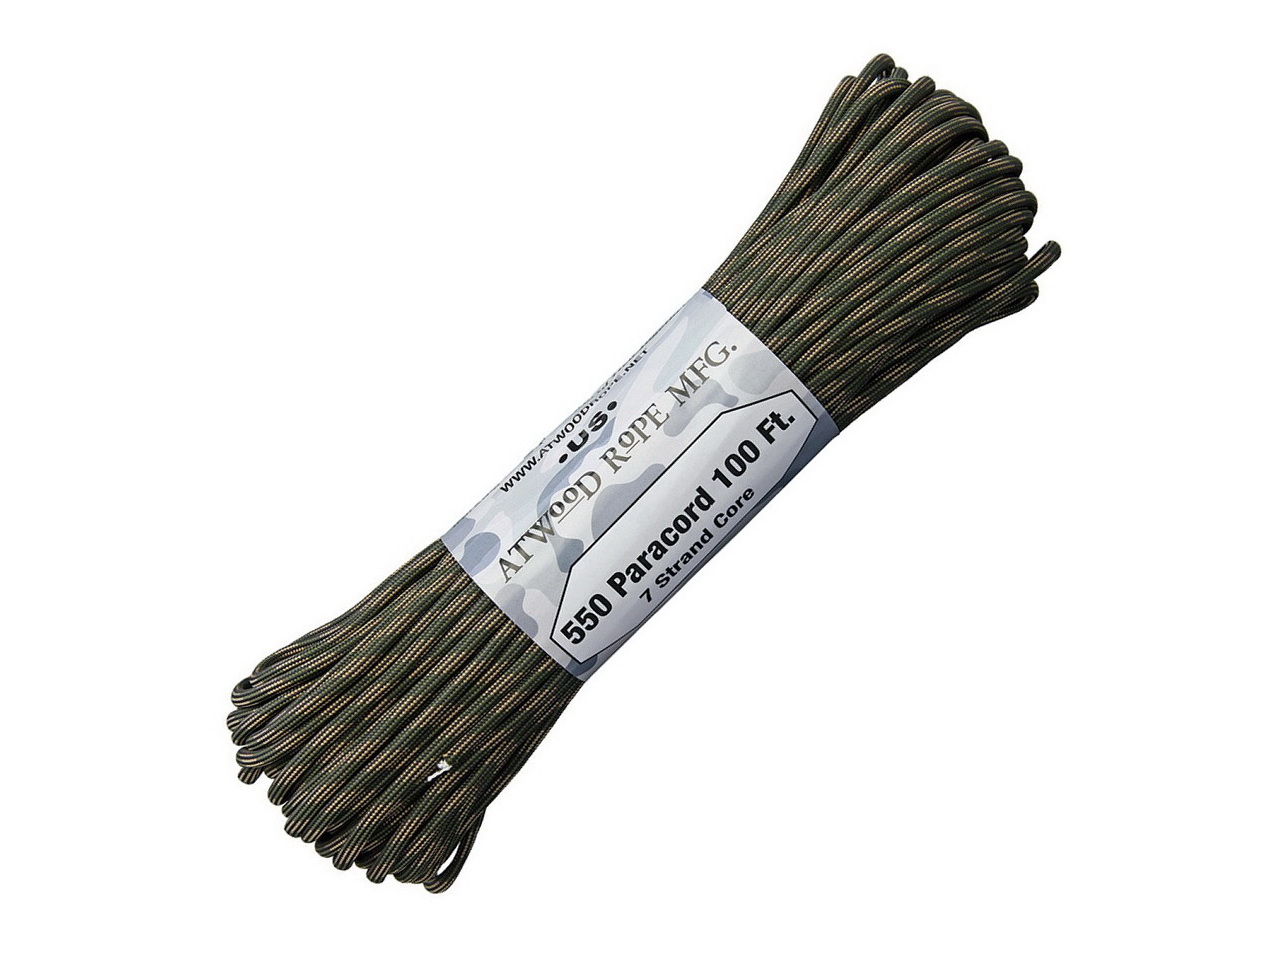 Atwood Rope MFG Paracord 550 Cavalry